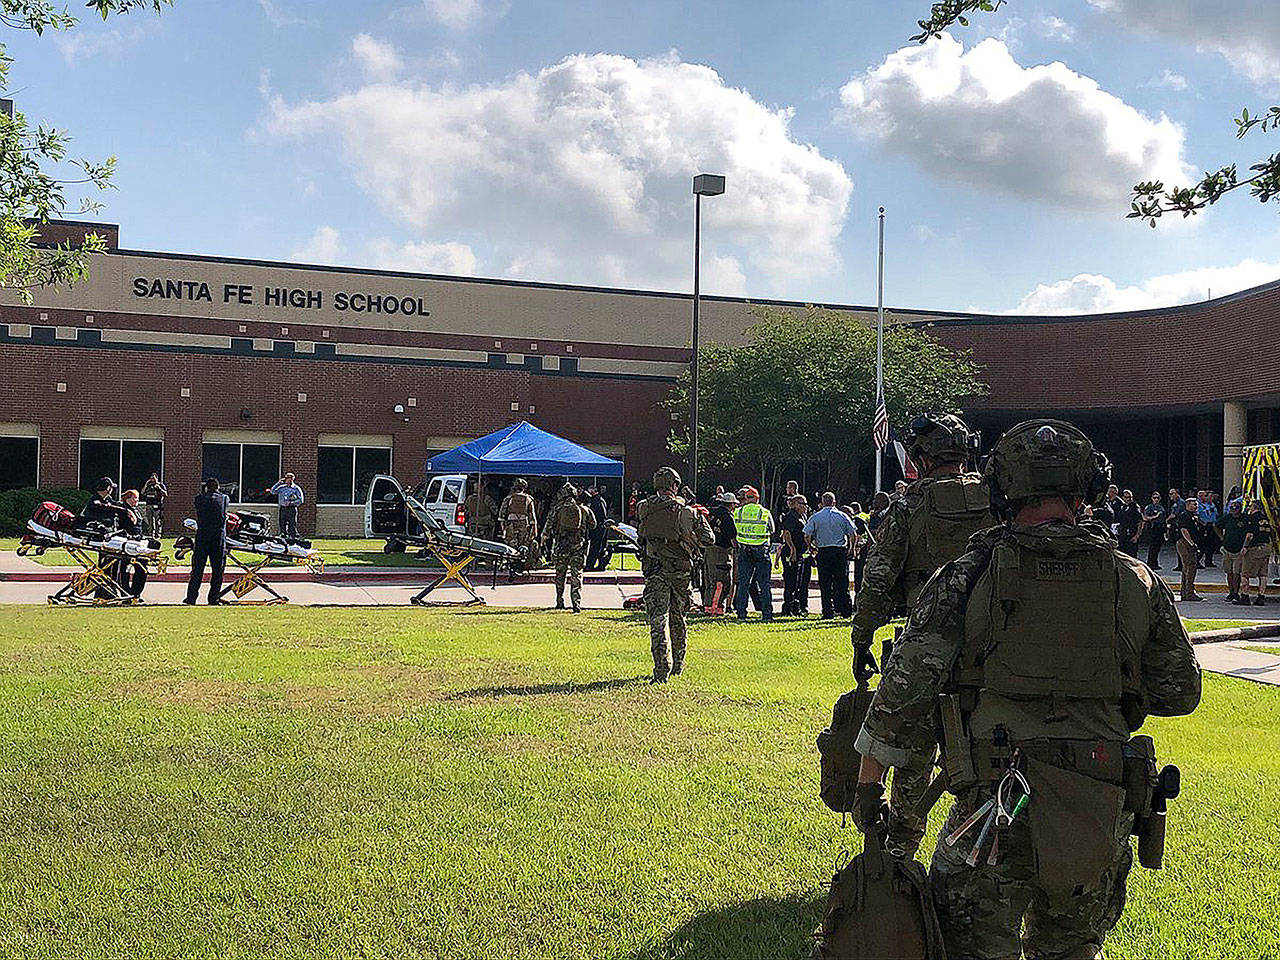 At least 10 people were killed and others injured when a shooter opened fire on a high school near Houston on Friday morning, according to officials. A male suspect, thought to be a student, has been arrested in the shooting at Santa Fe High School. (Harris County Sheriff’s Office)